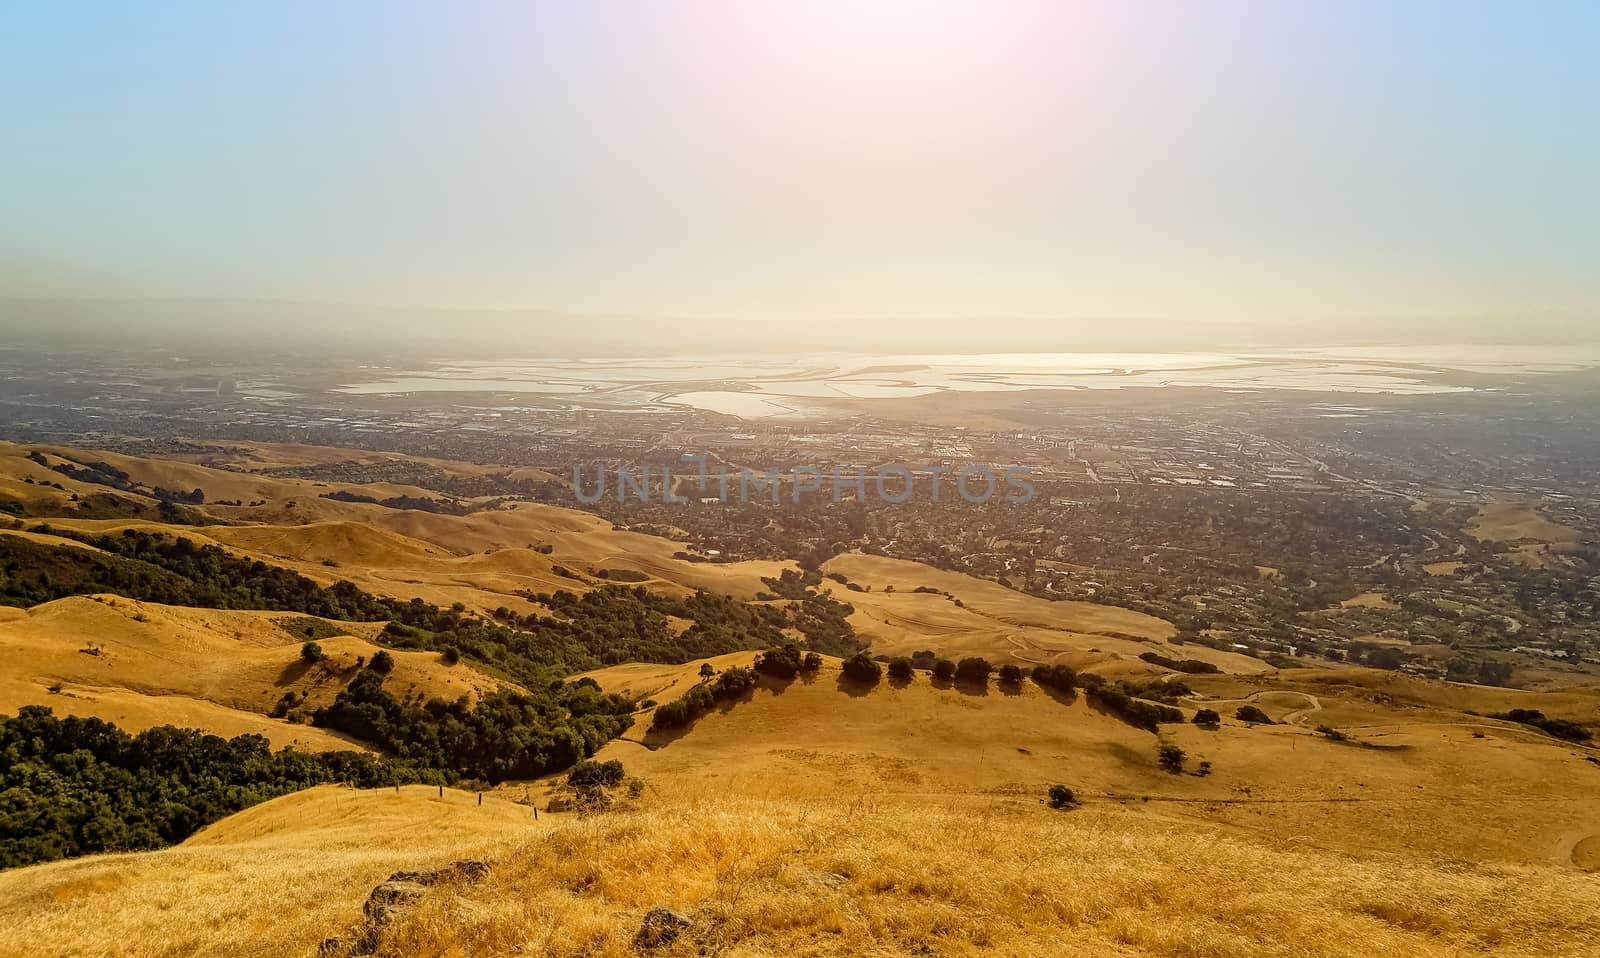 South East San Francisco Bay by whitechild